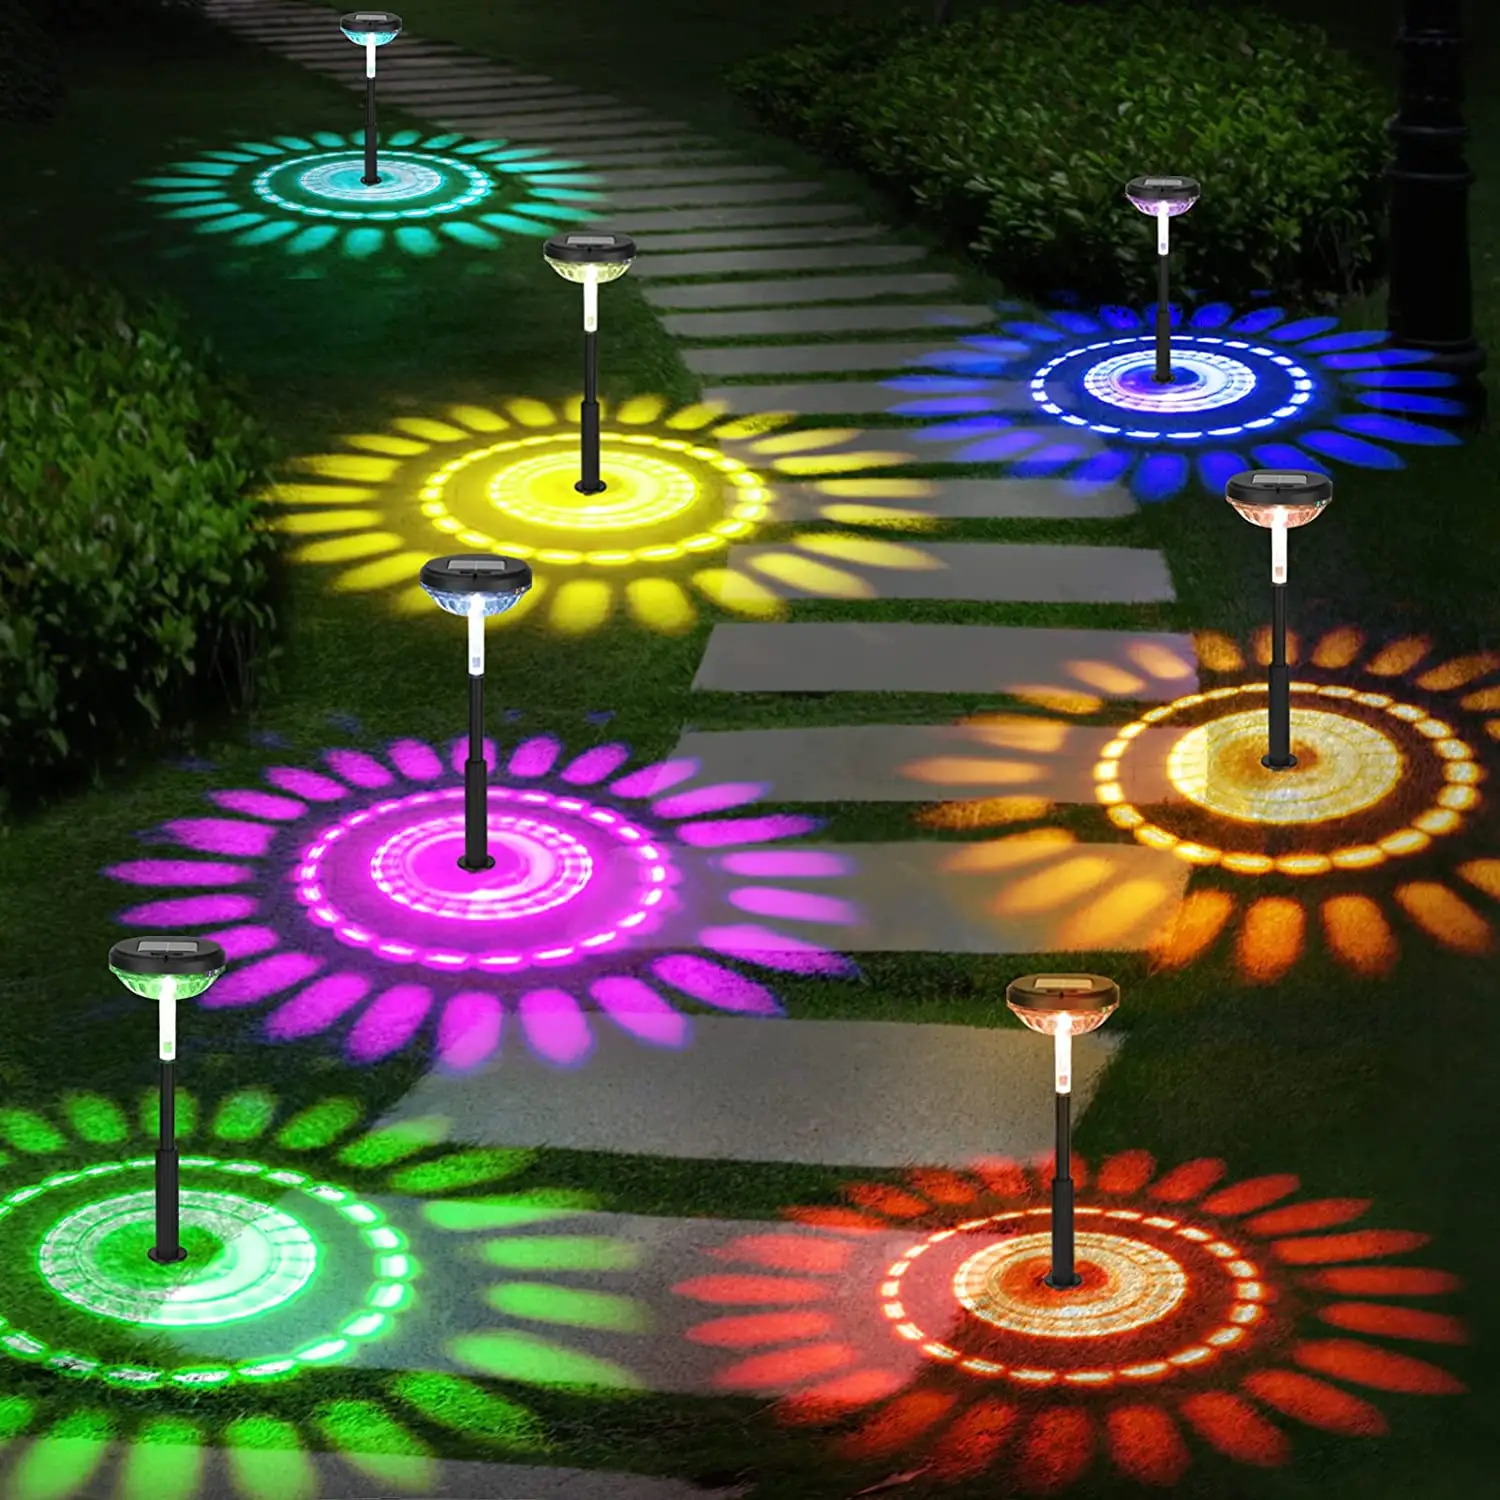 Amazon Best Seller Outdoor Landscape RGB Color Changing Waterproof Ground Plug Lamp LED Solar Garden Lawn Lights Pathway